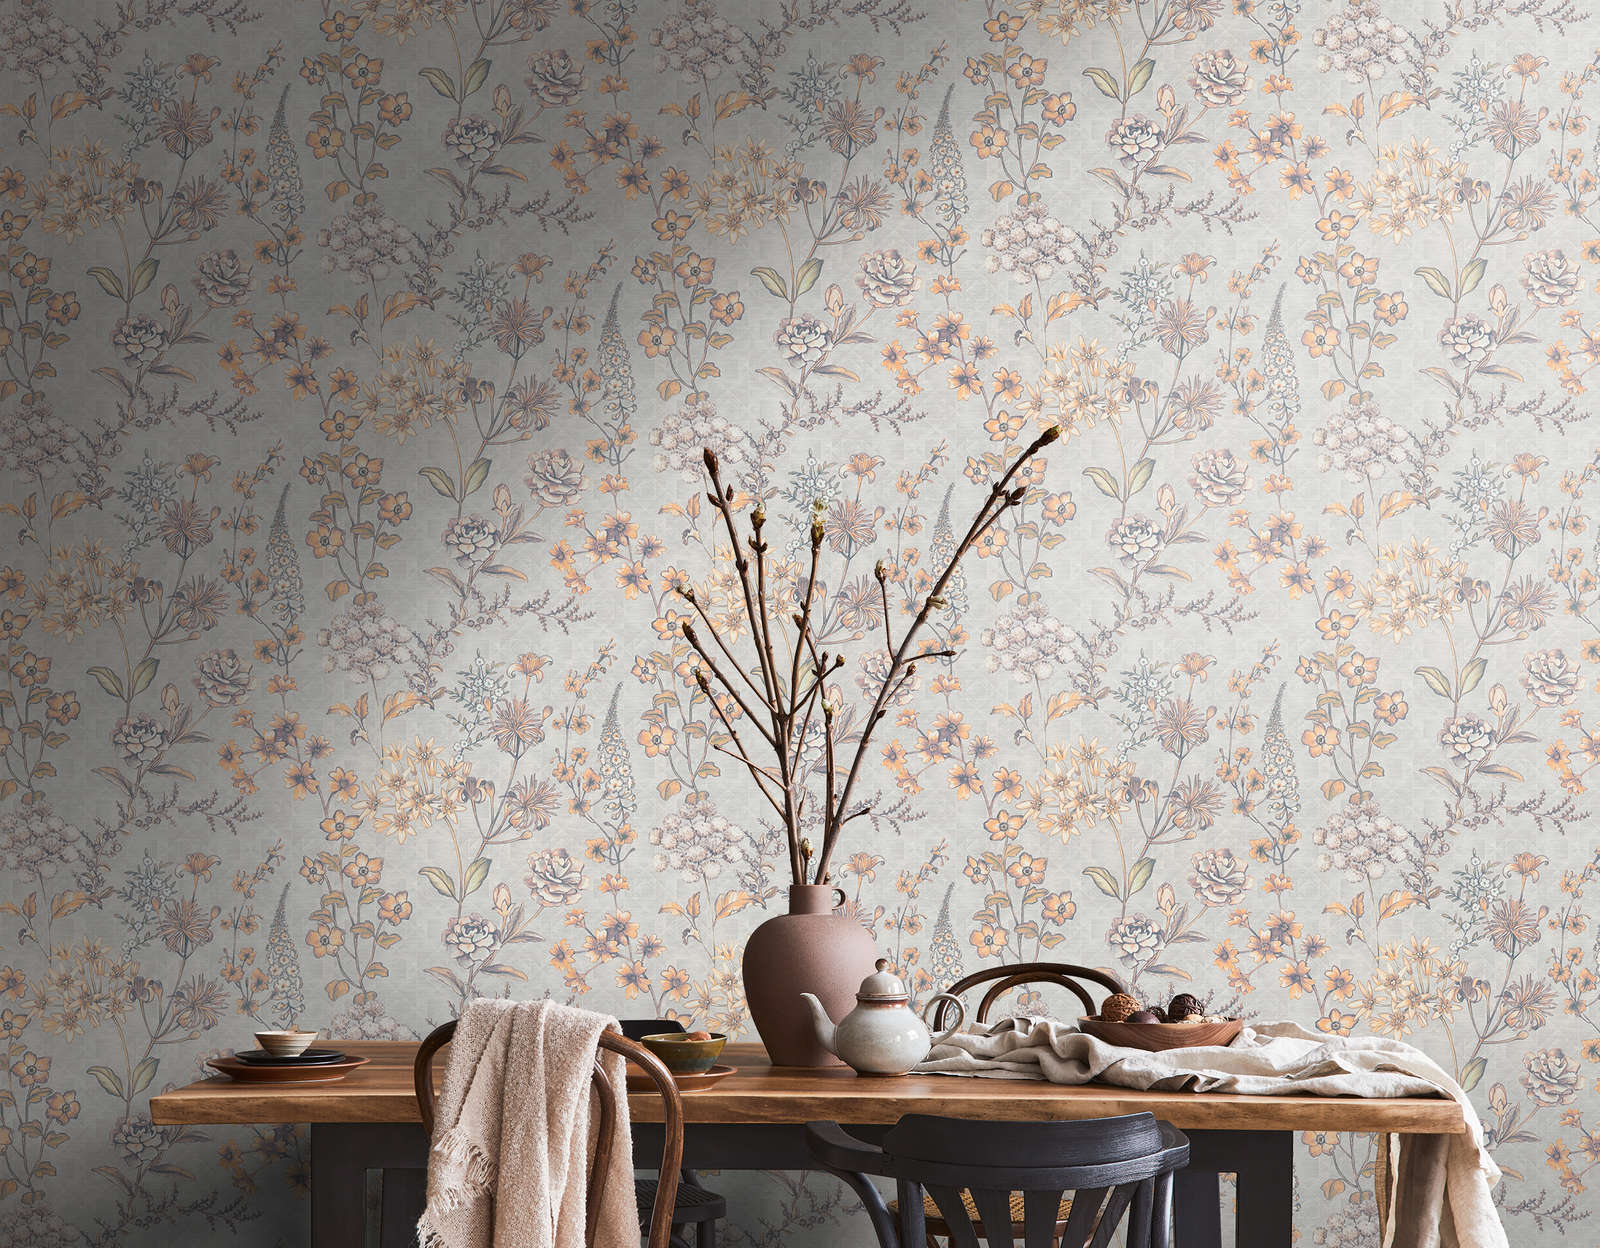             Non-woven wallpaper with floral vintage design - light grey, orange, yellow
        